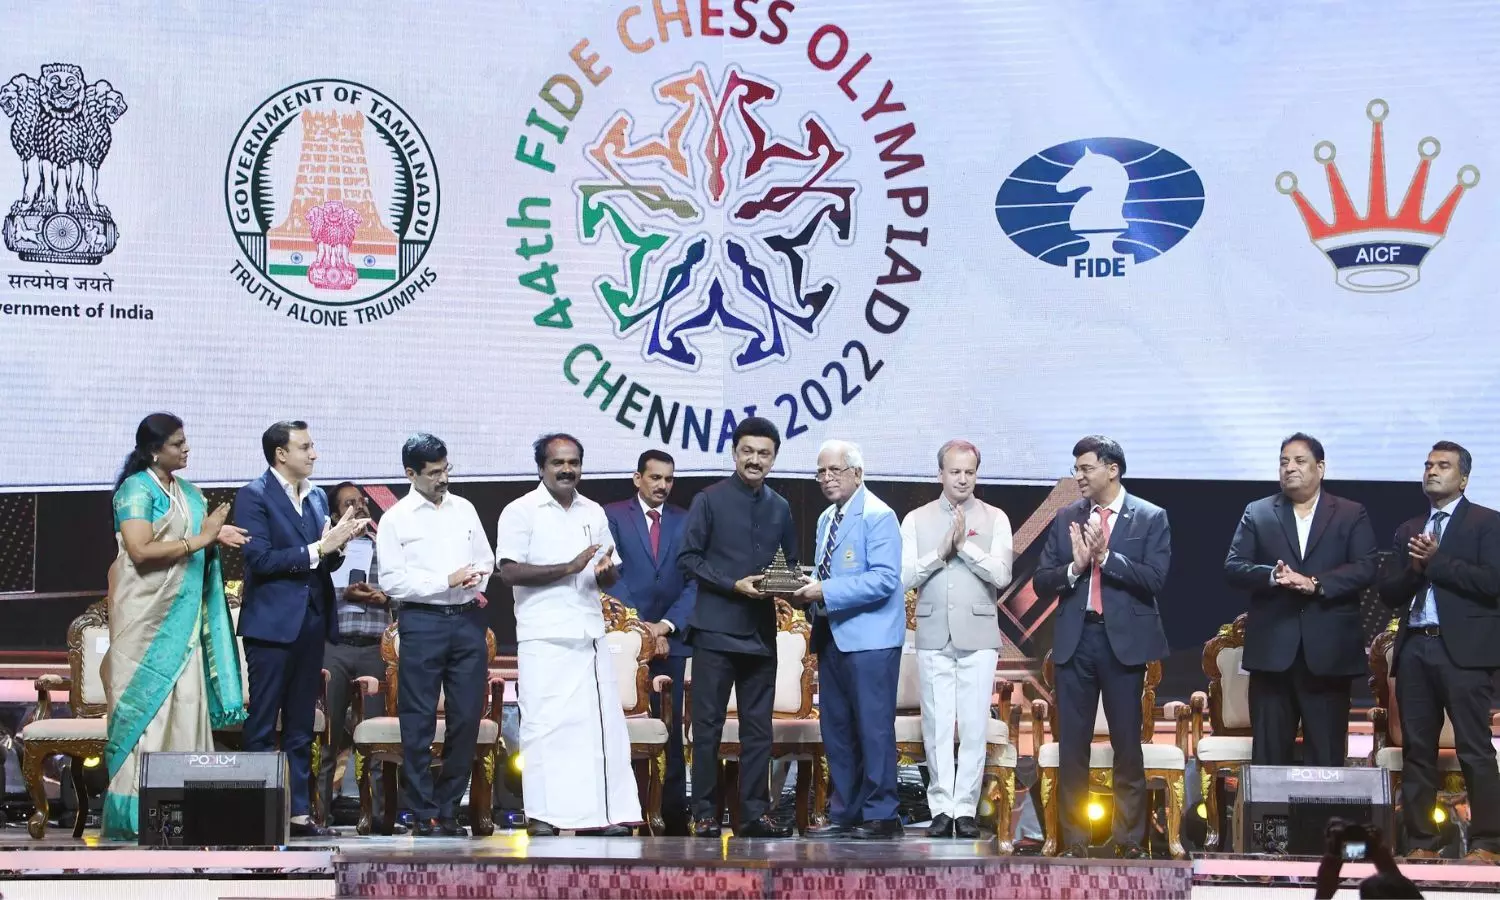 Chess Olympiad 2022: Medal rush expected for India amid home crowd cheers -  BBC News